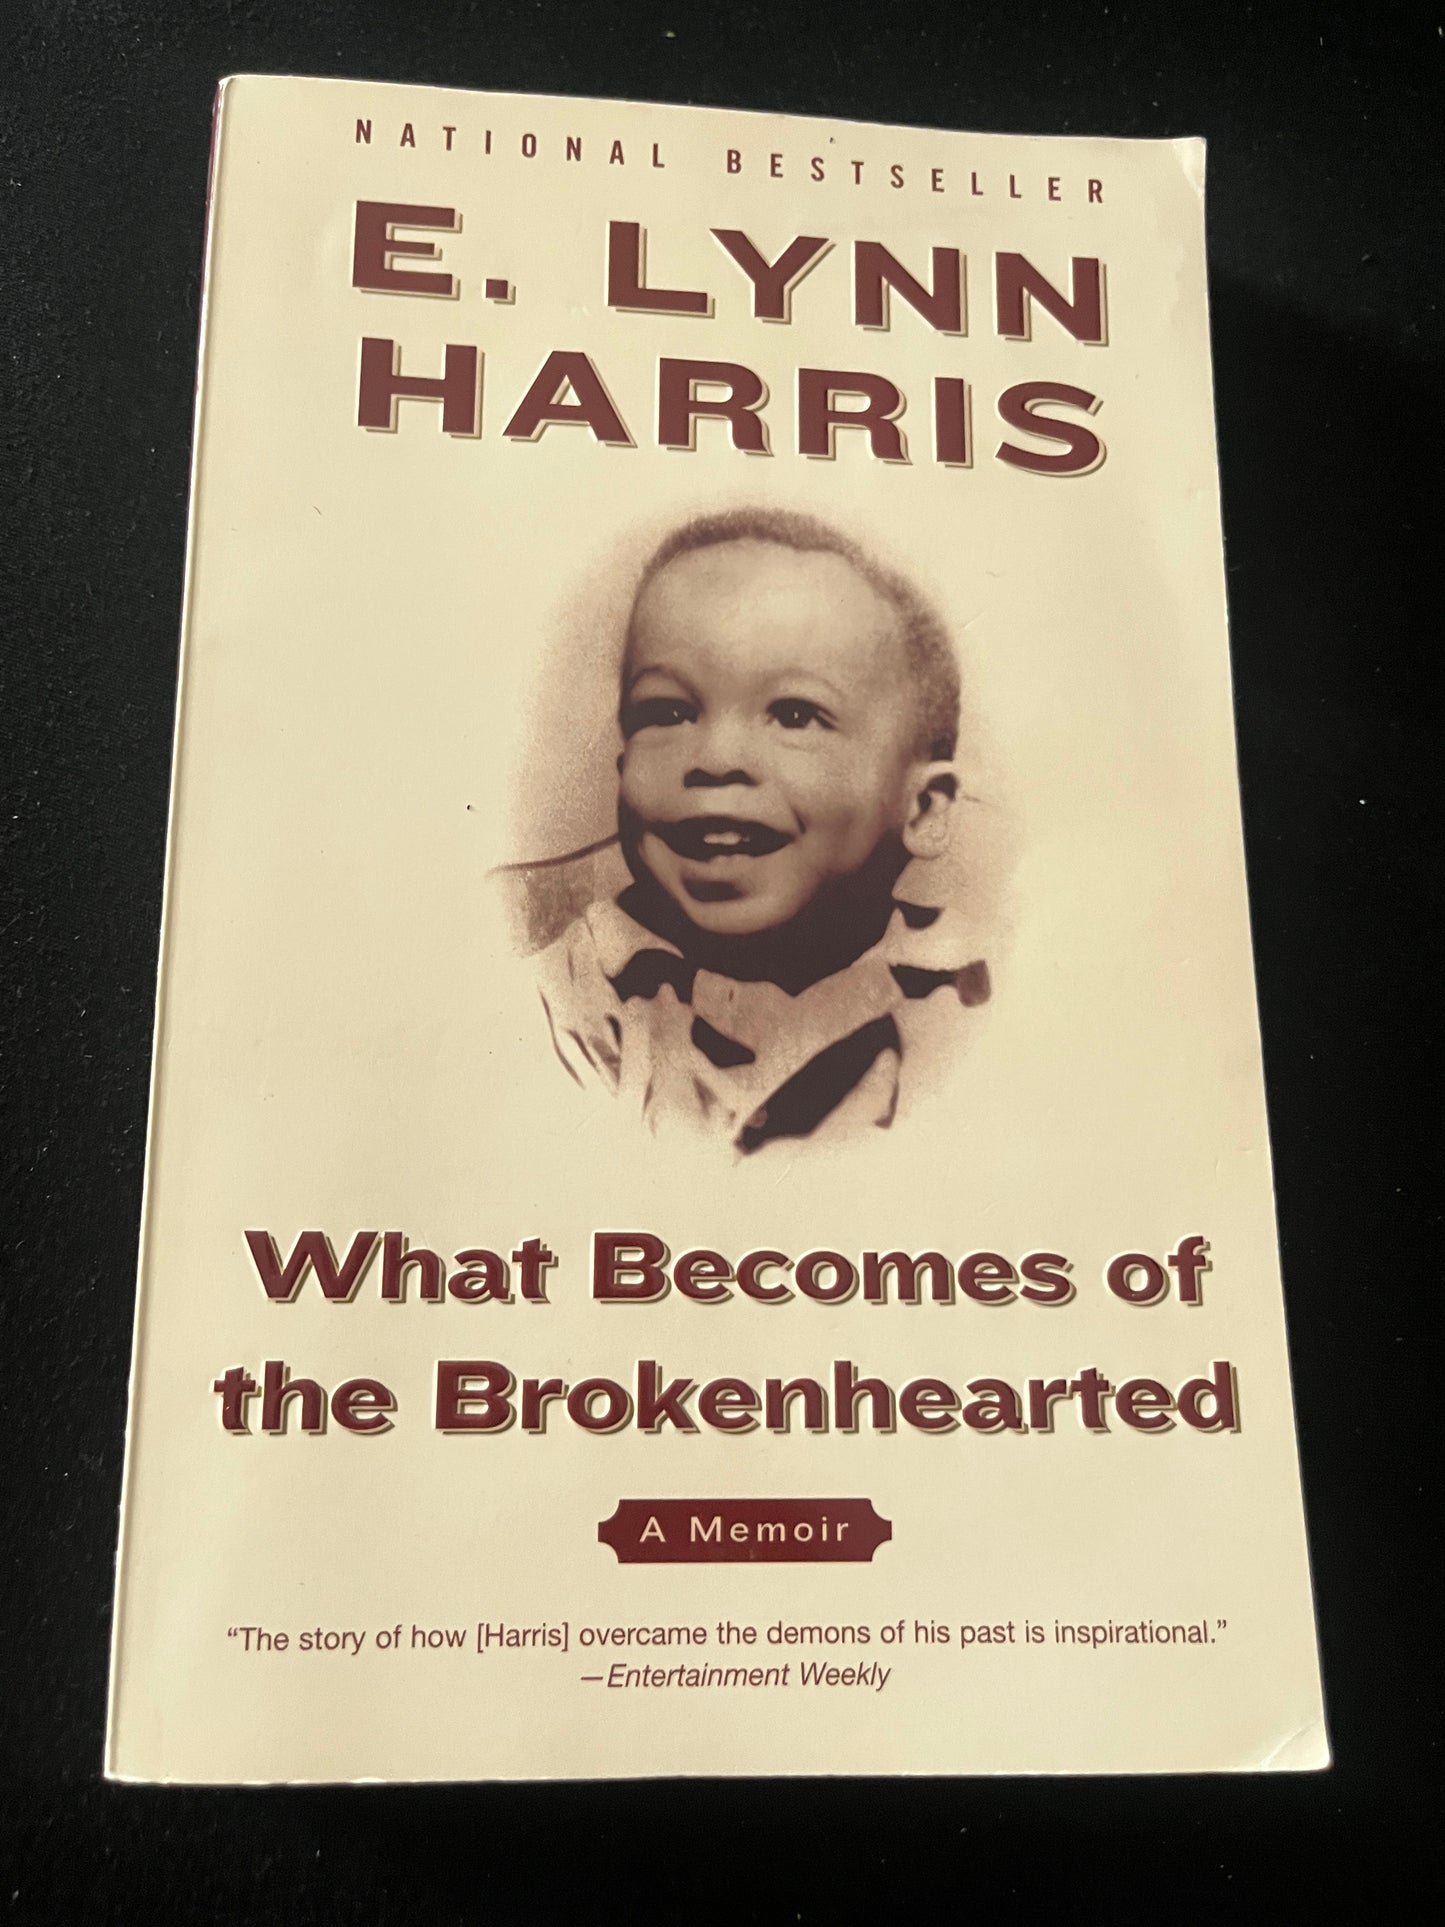 WHAT BECOMES OF THE BROKENHEARTED by E. Lynn Harris